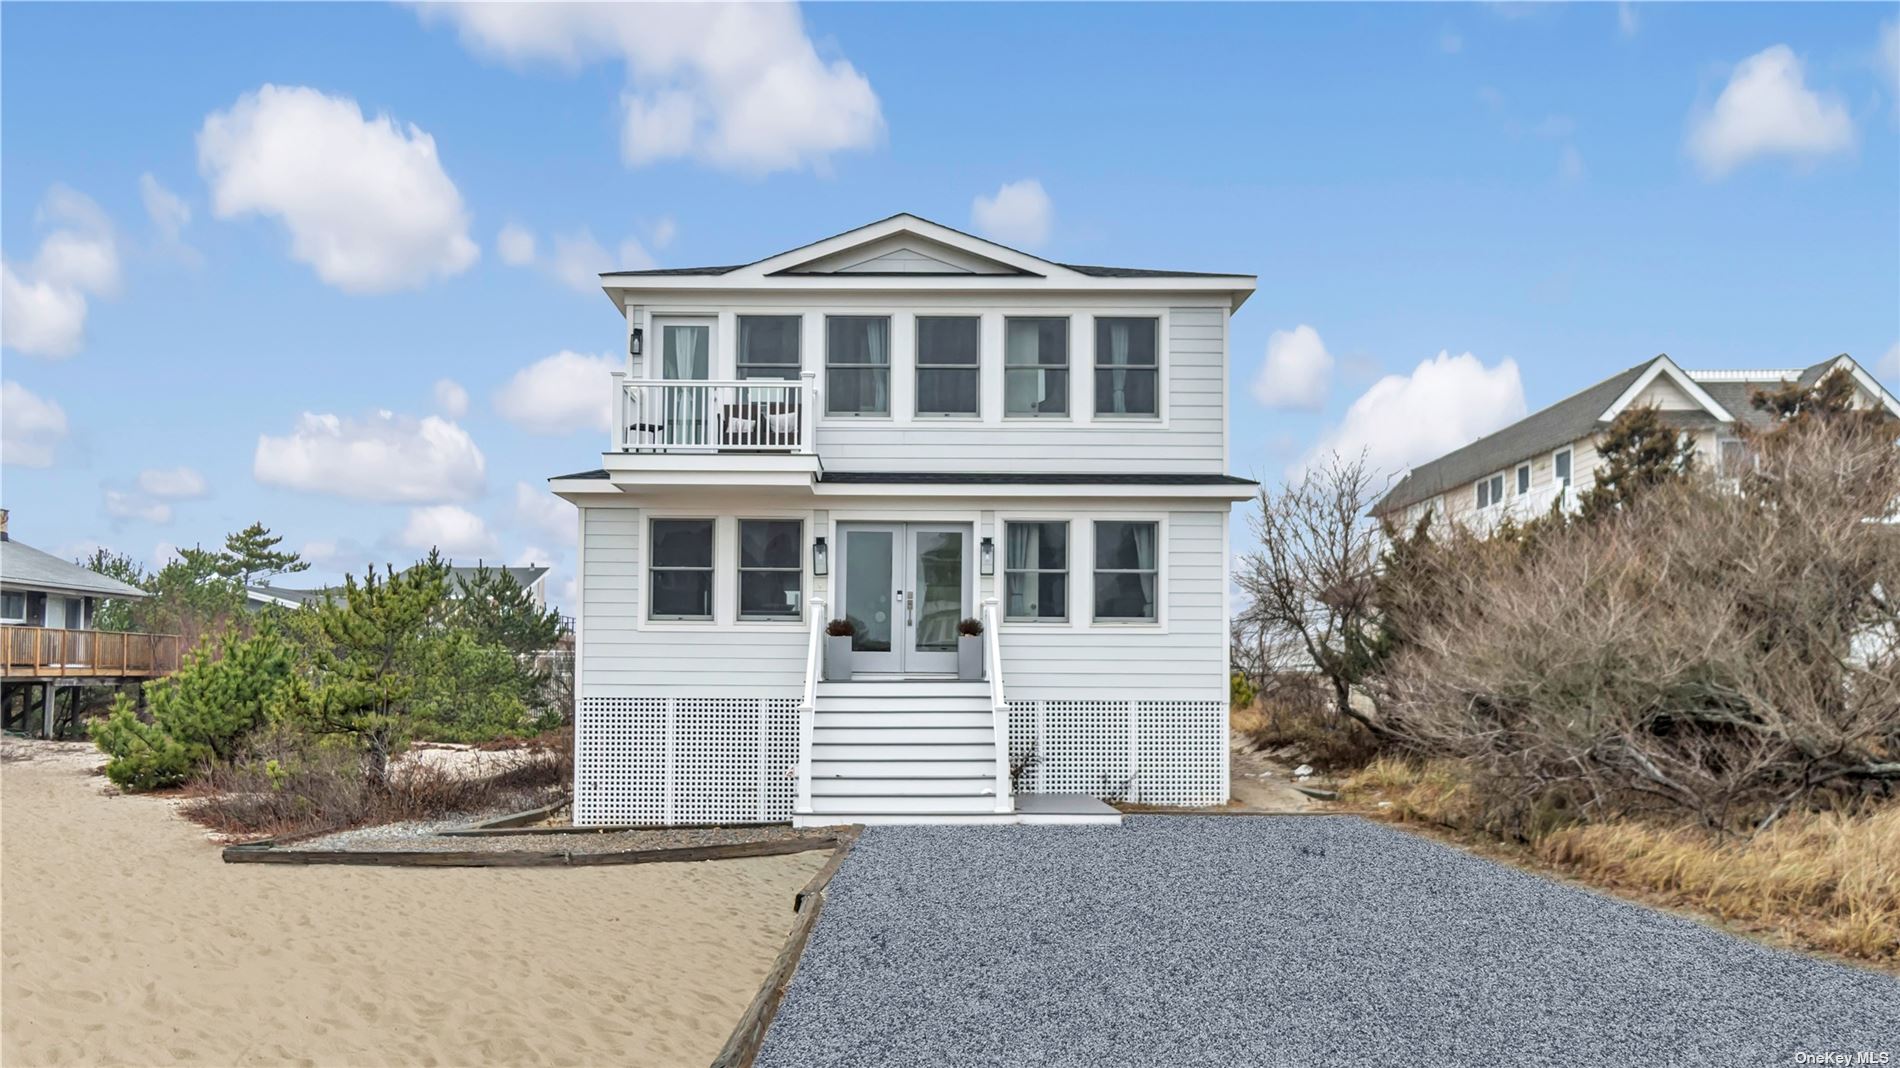 Homes for sale in Westhampton Beach | View 800 Dune Road | 3 Beds, 4 Baths